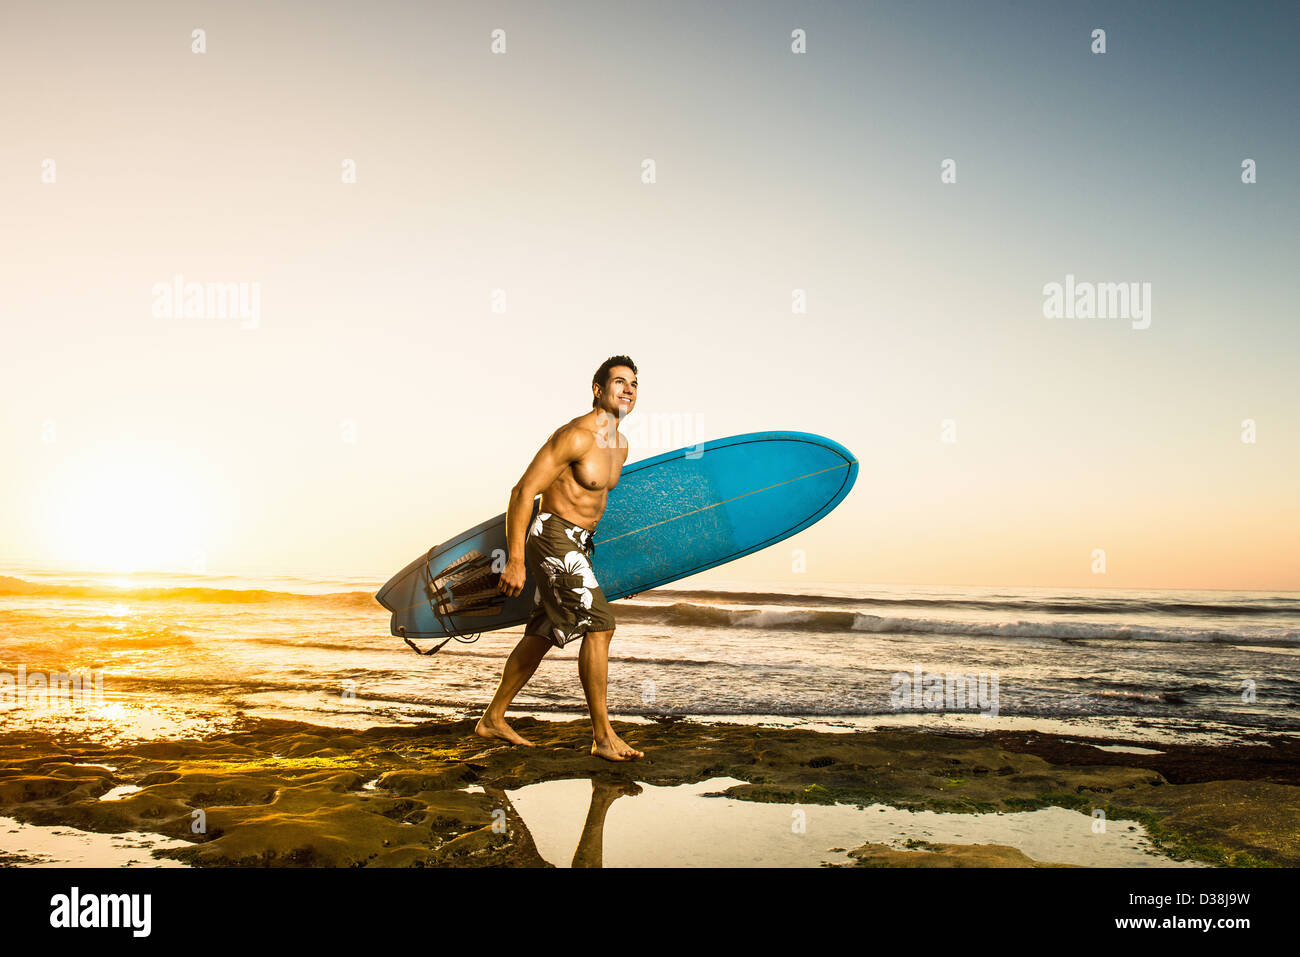 Man carrying surfboard on Rocky beach Banque D'Images